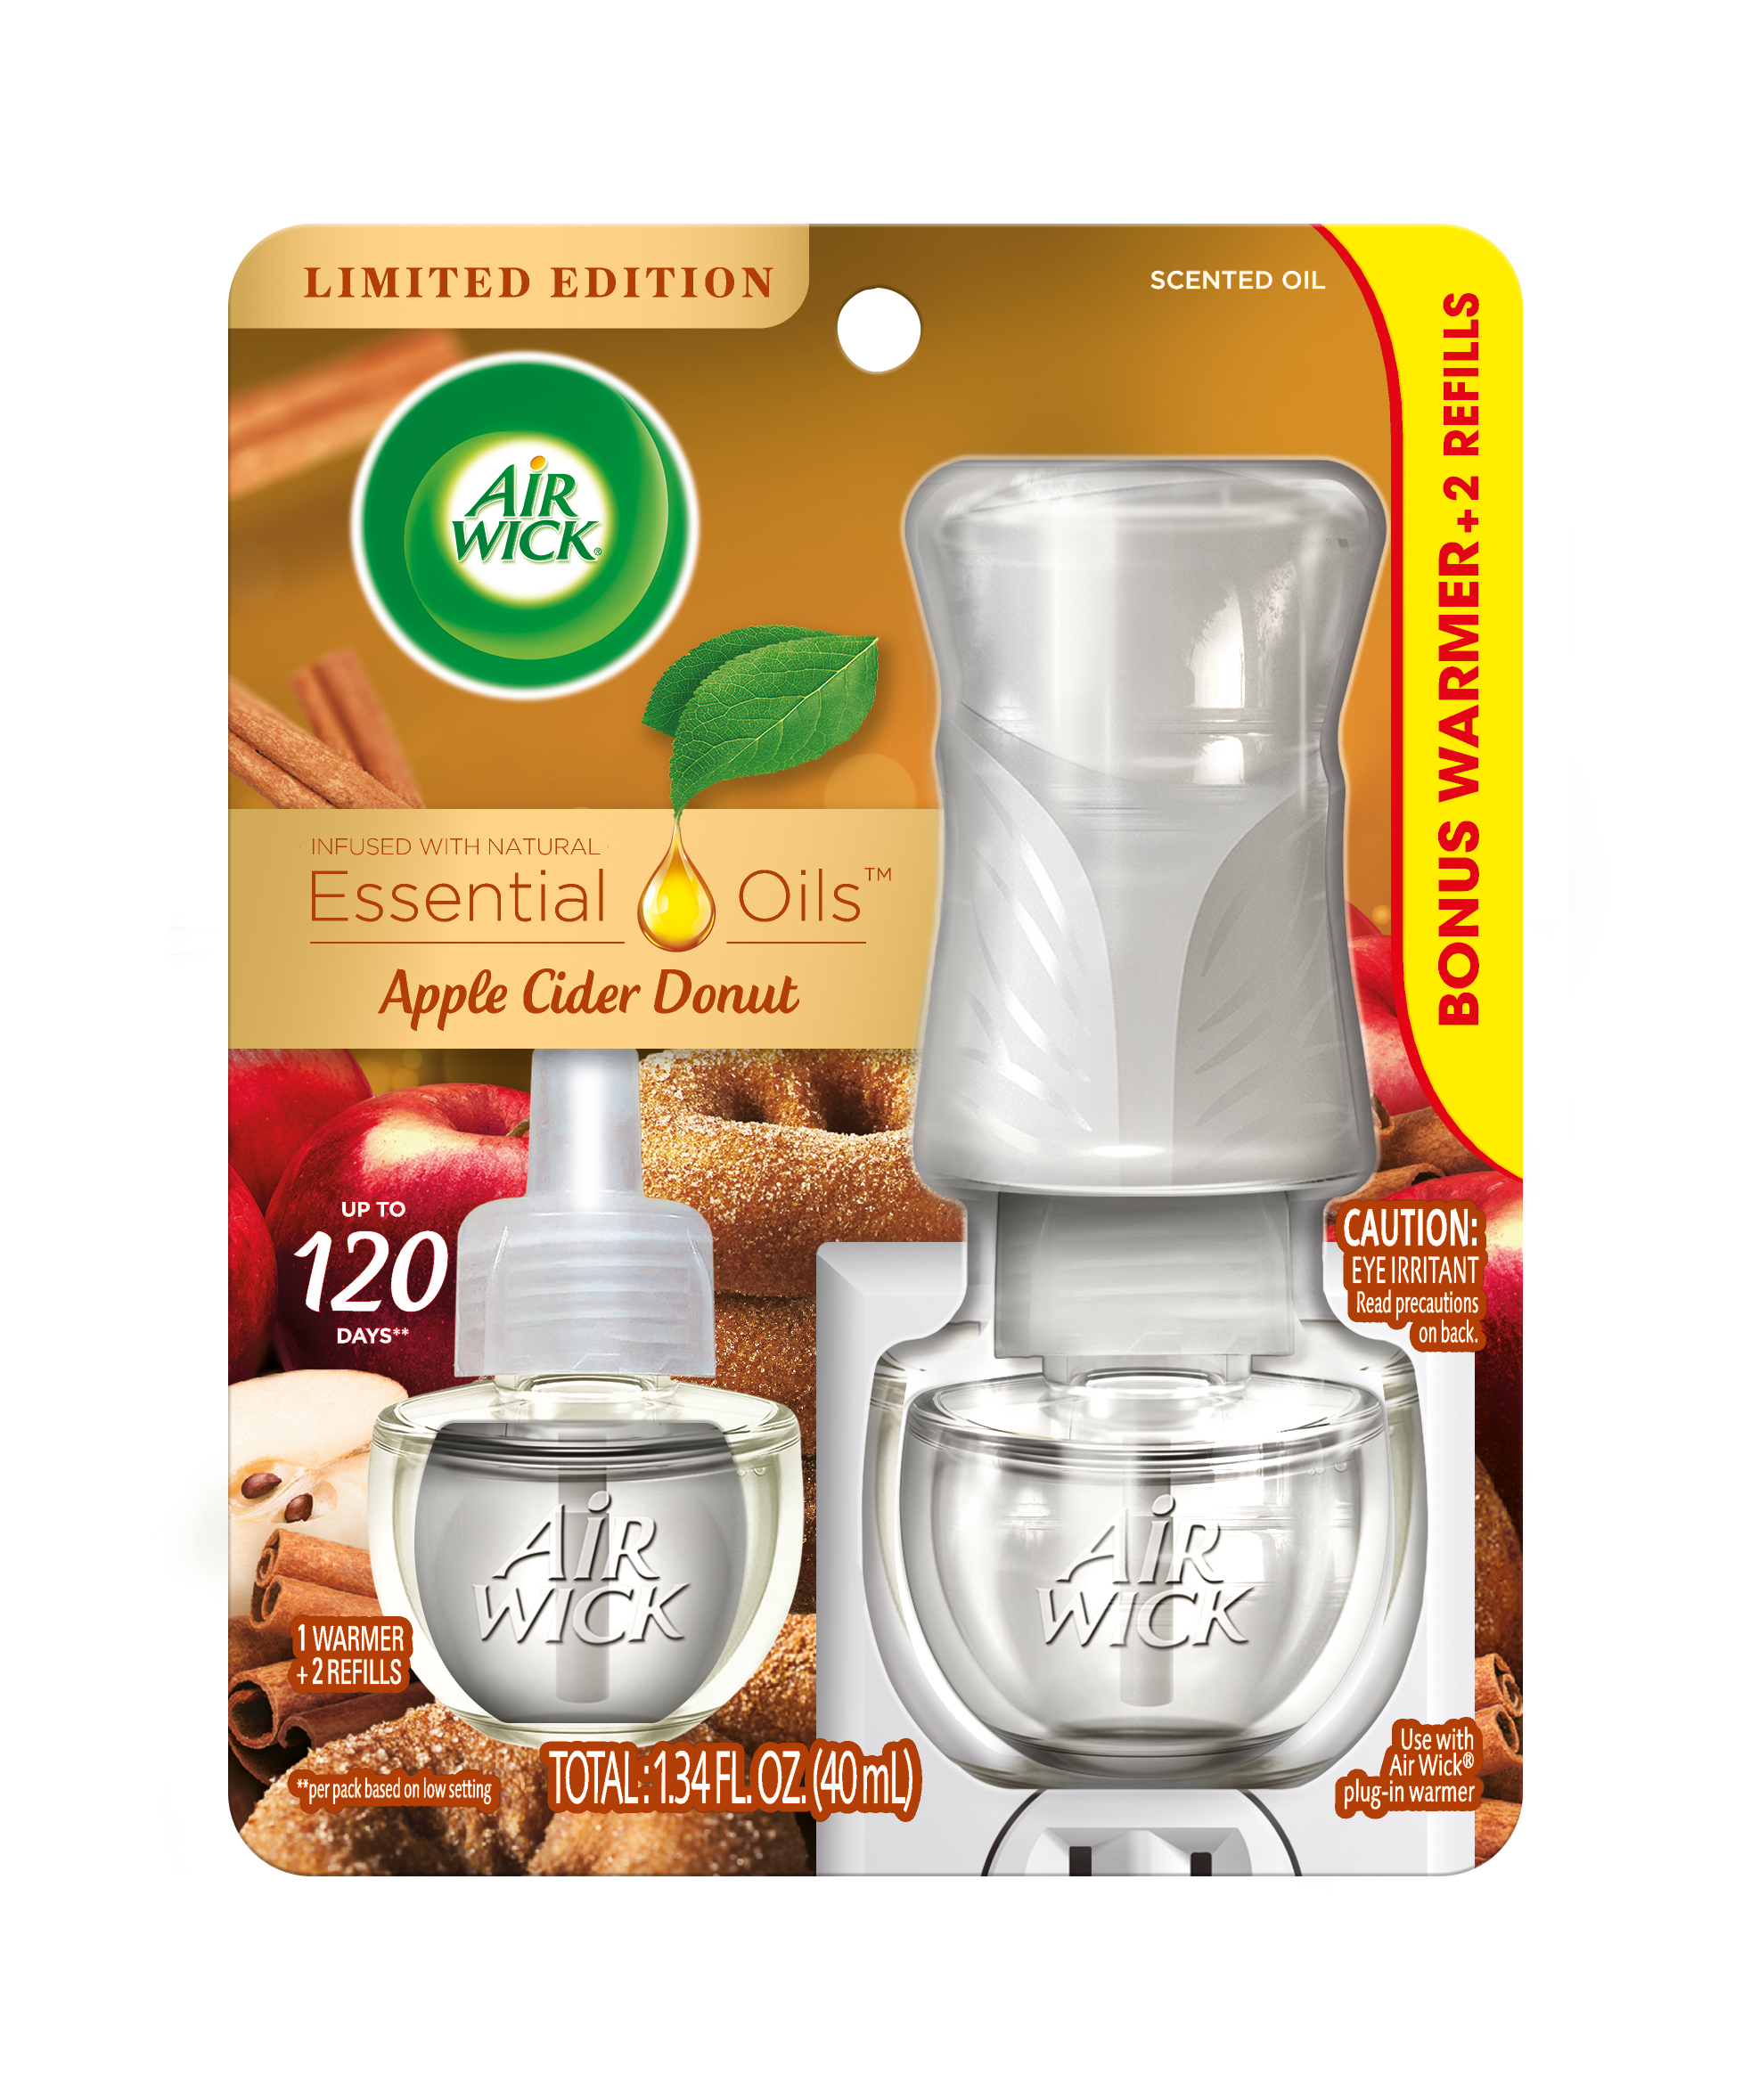 AIR WICK Scented Oil  Apple Cider Donut  Kit